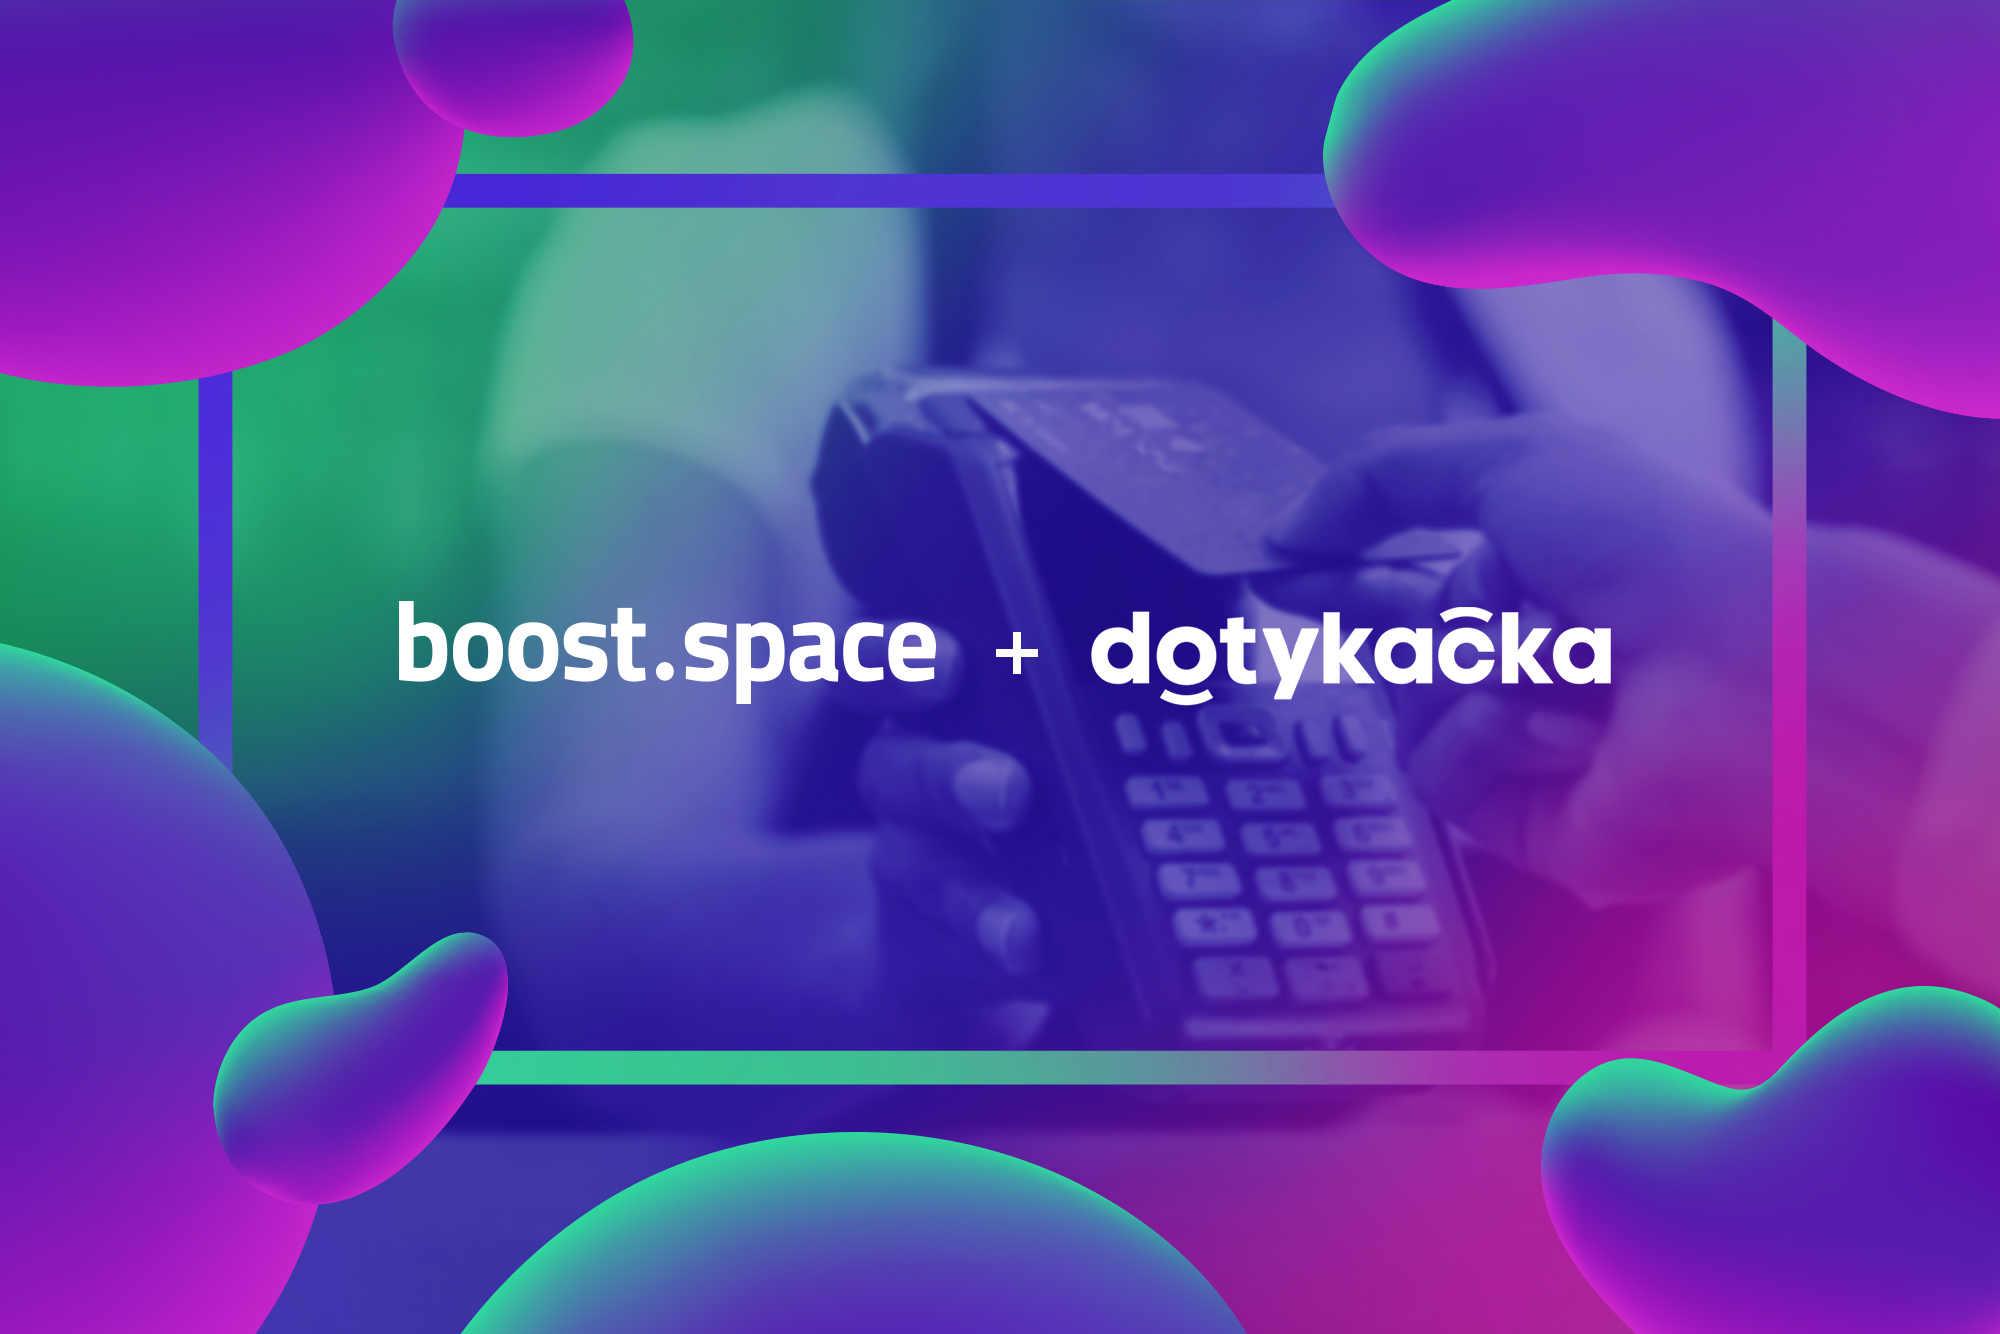 New integration with the Dotykačka POS system